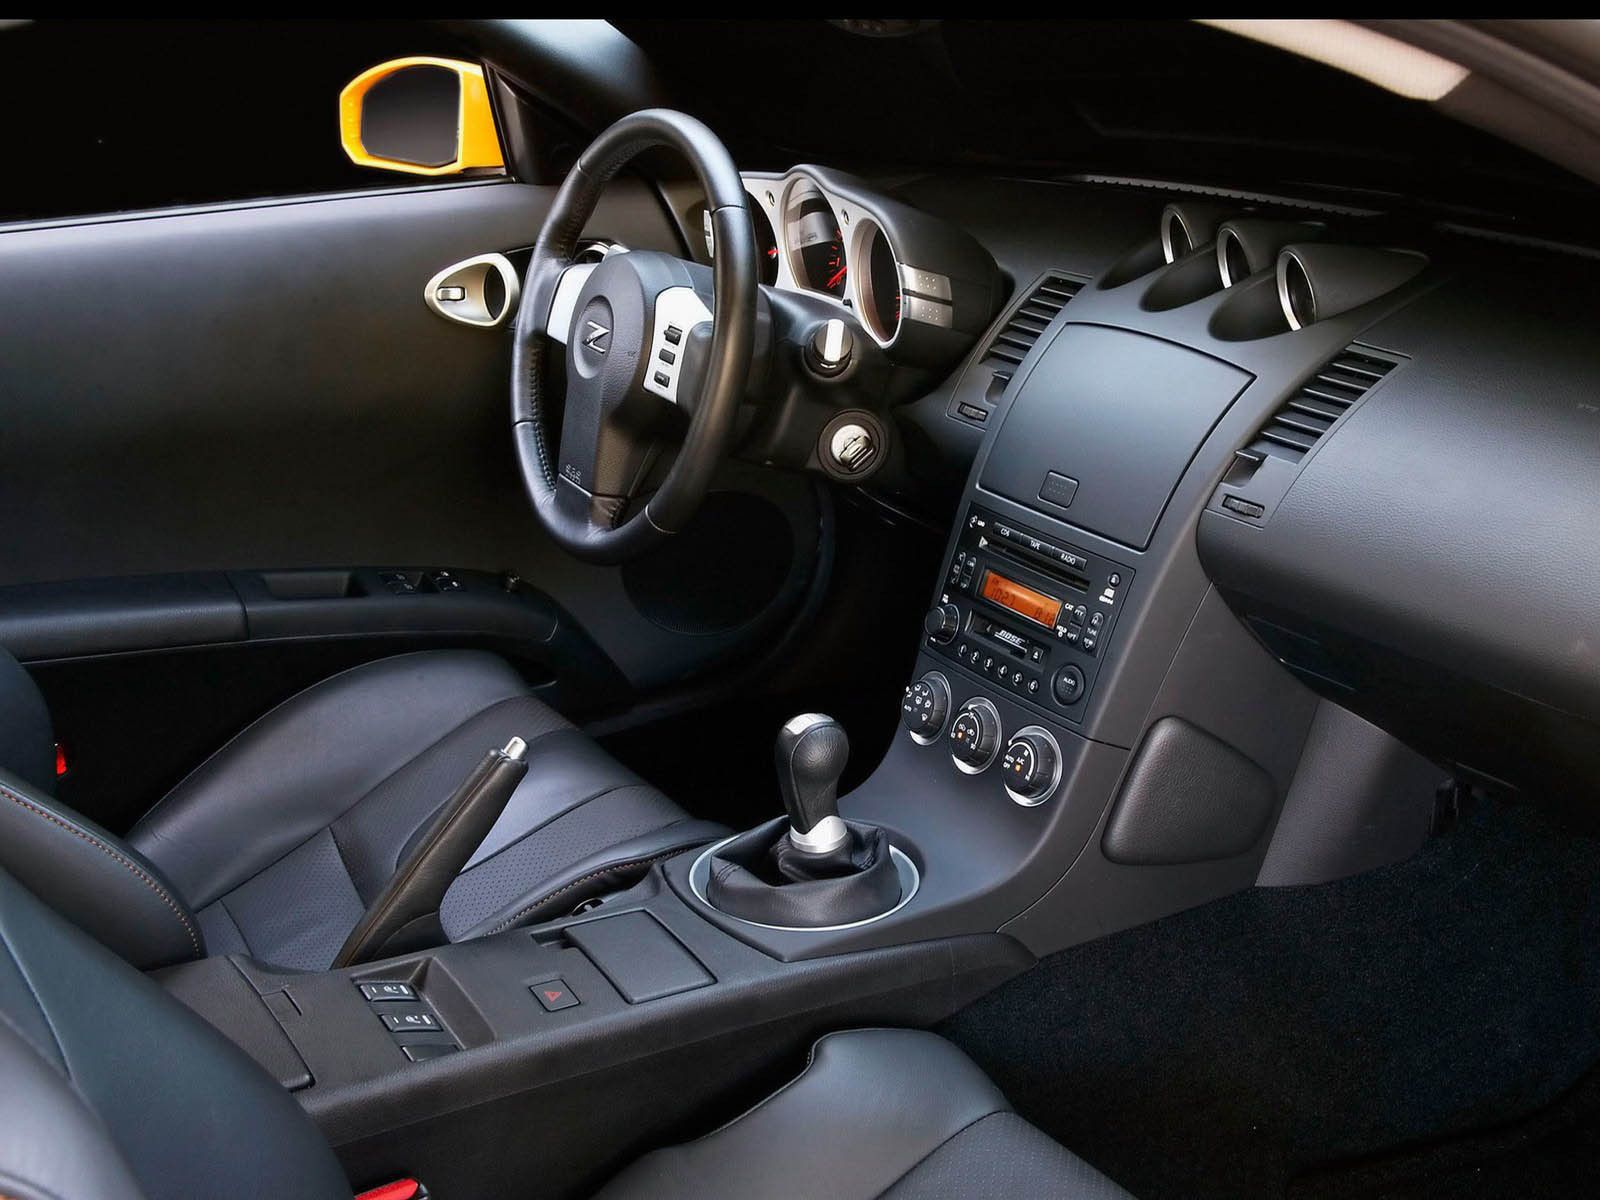 The Comfortable Interior Of The Nissan 350Z